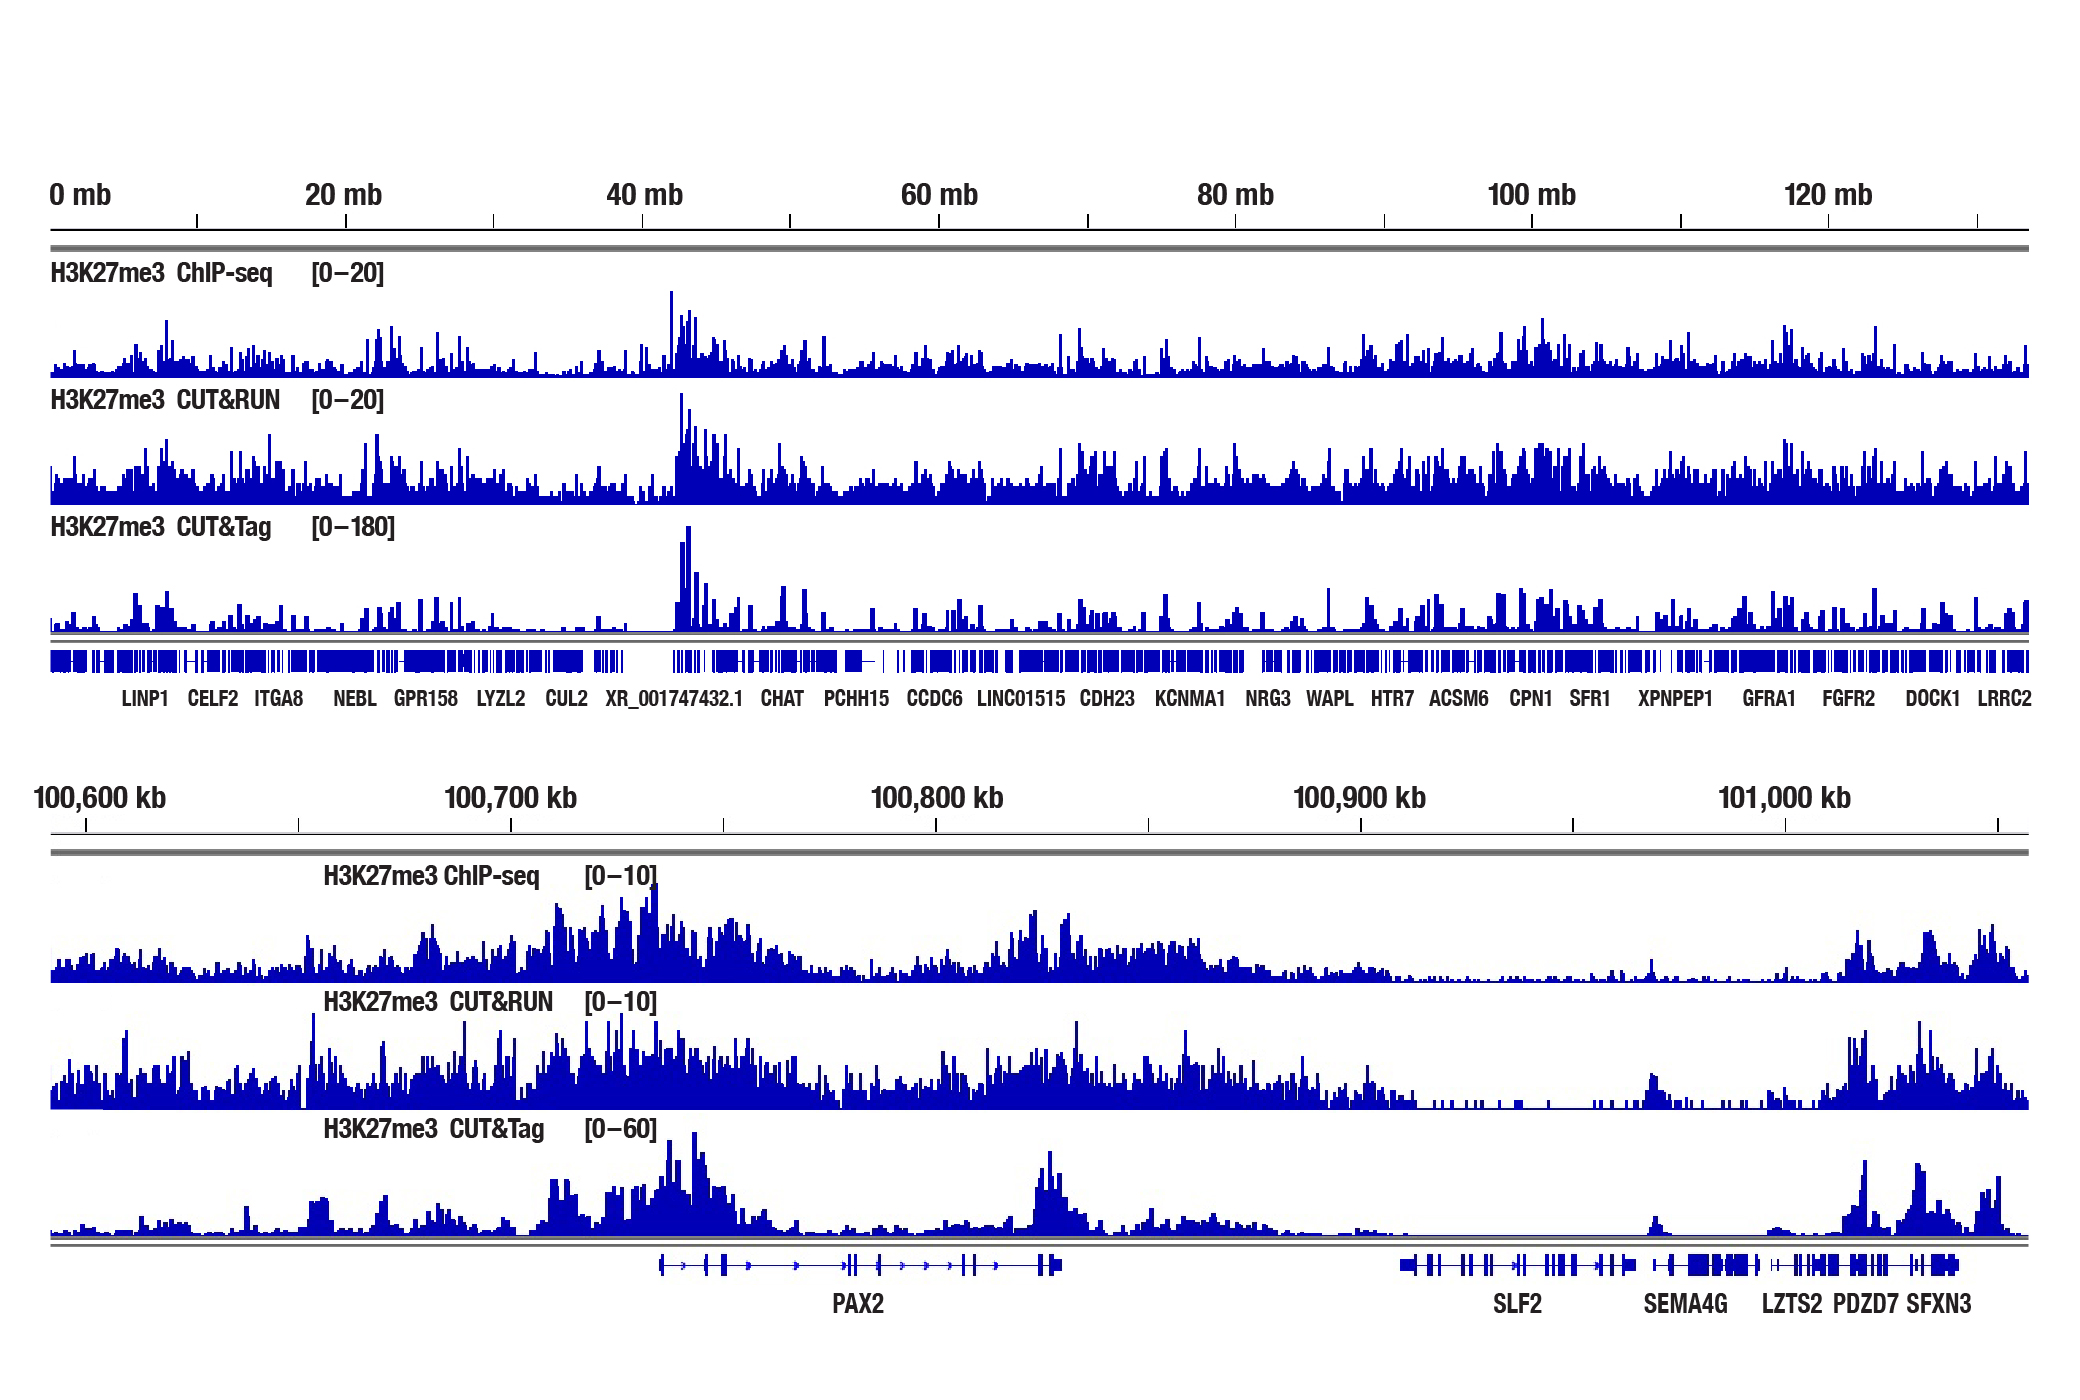 H3K27me3 sequencing results for ChIP-seq, CUT&RUN, and CUT&Tag